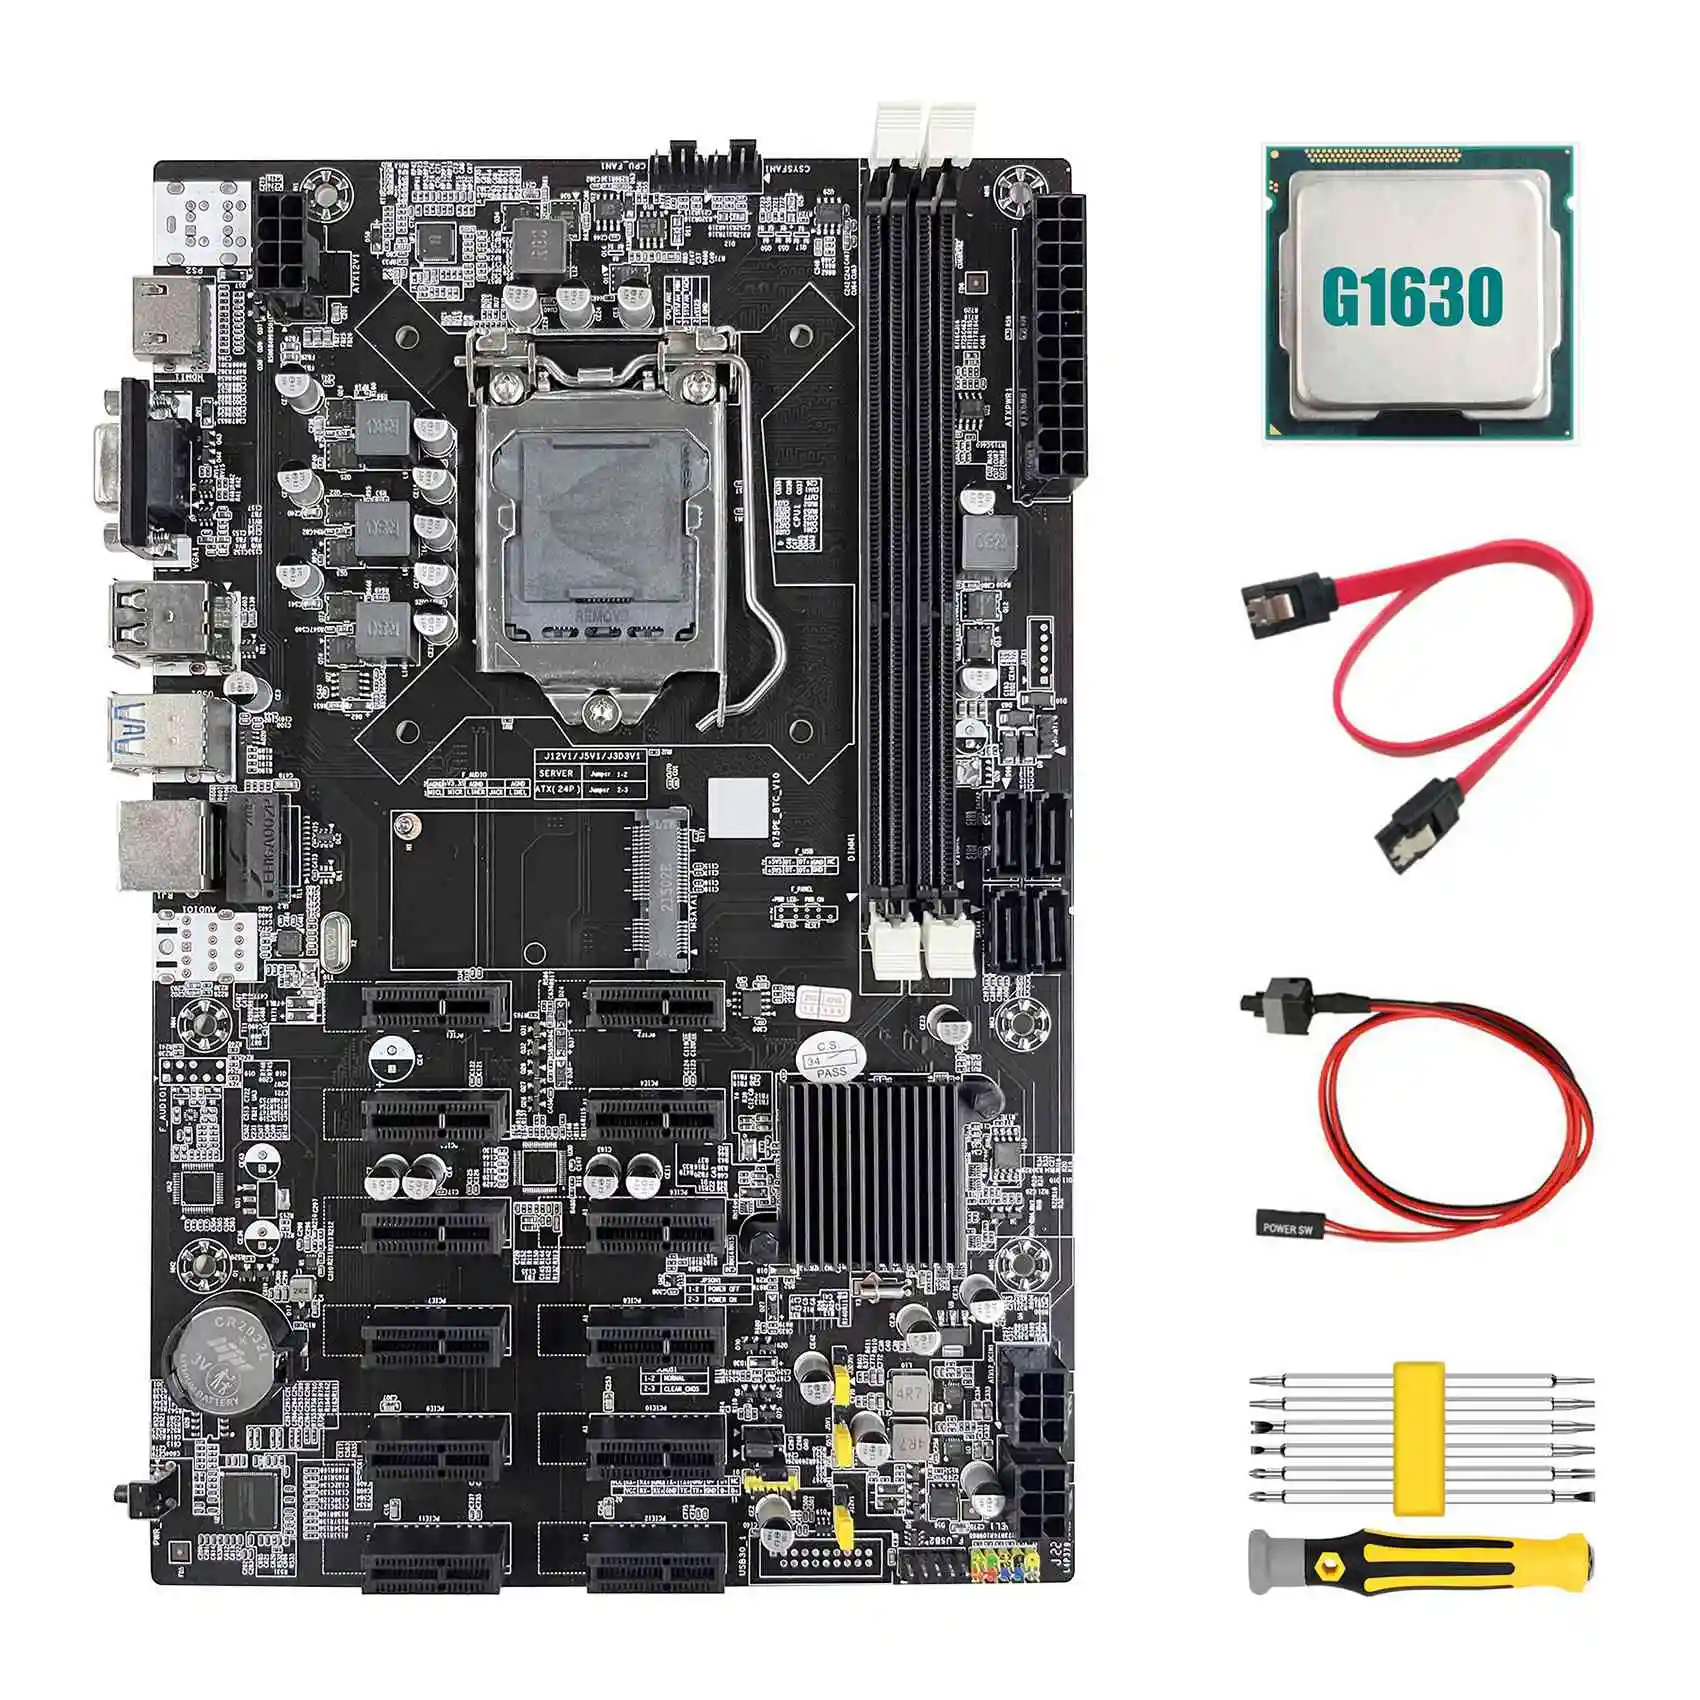 B75 ETH Mining Motherboard 12 PCIE+G1630 CPU+Screwdriver Set+SATA Cable+Switch Cable LGA1155 B75 BTC Miner Motherboard